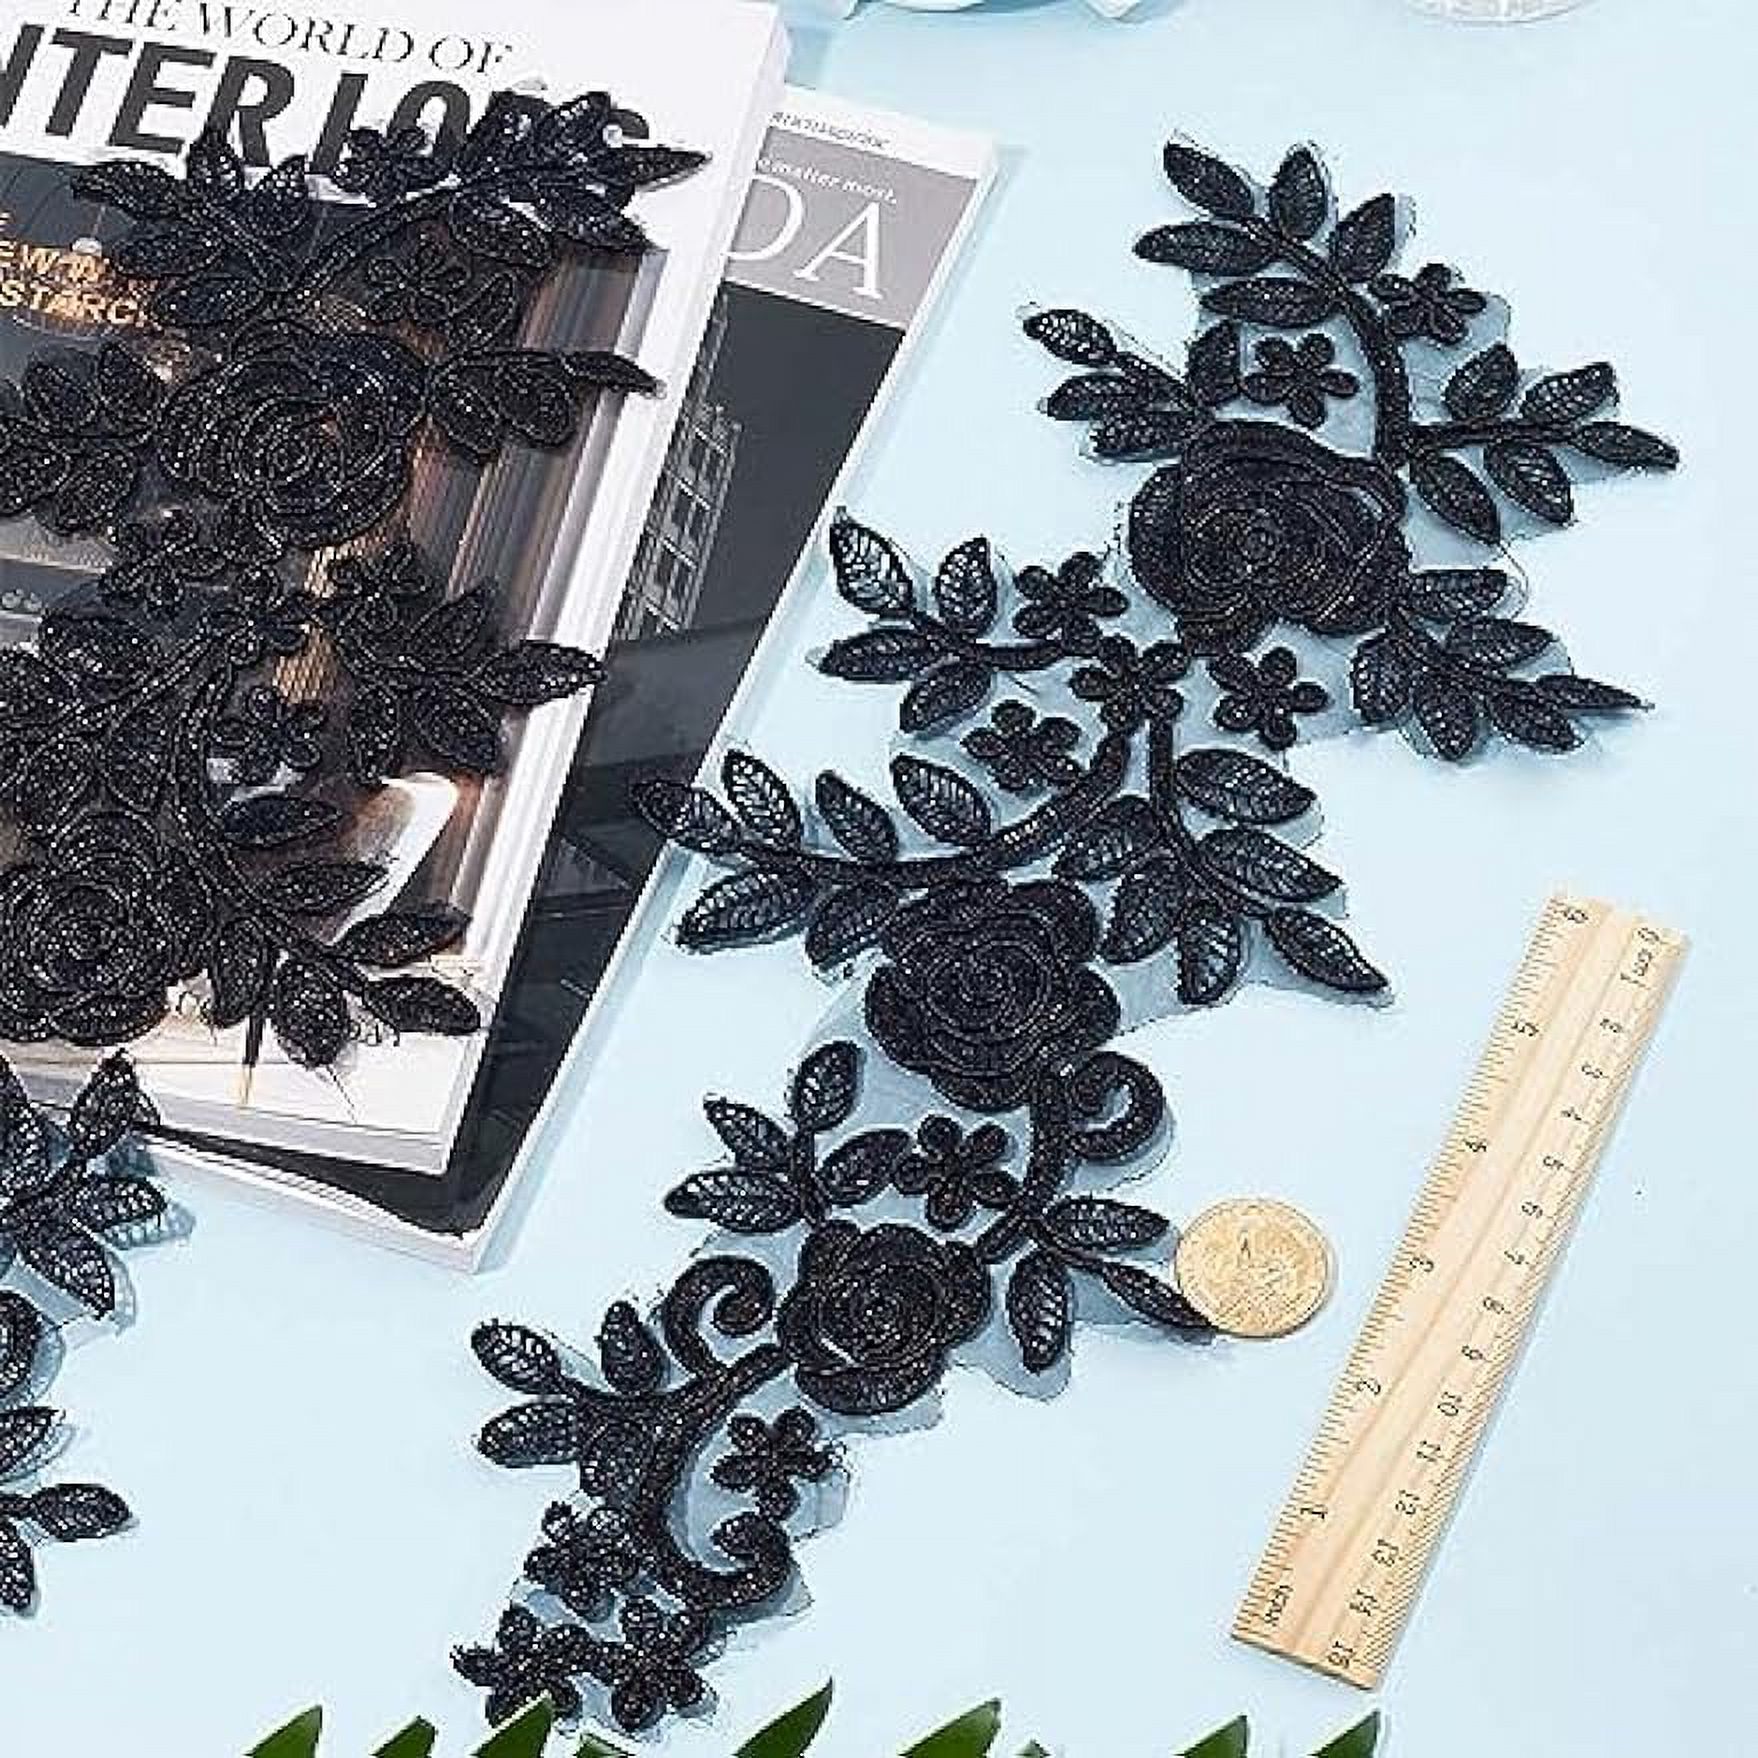 4Pcs Floral Lace Applique Black Flower Embroidered Sew on Patches Rose Leaves Collar Fabric Applique for DIY Sewing Crafts Dress Clothing Backpacks Embellishments 36x14.5cm - image 4 of 9